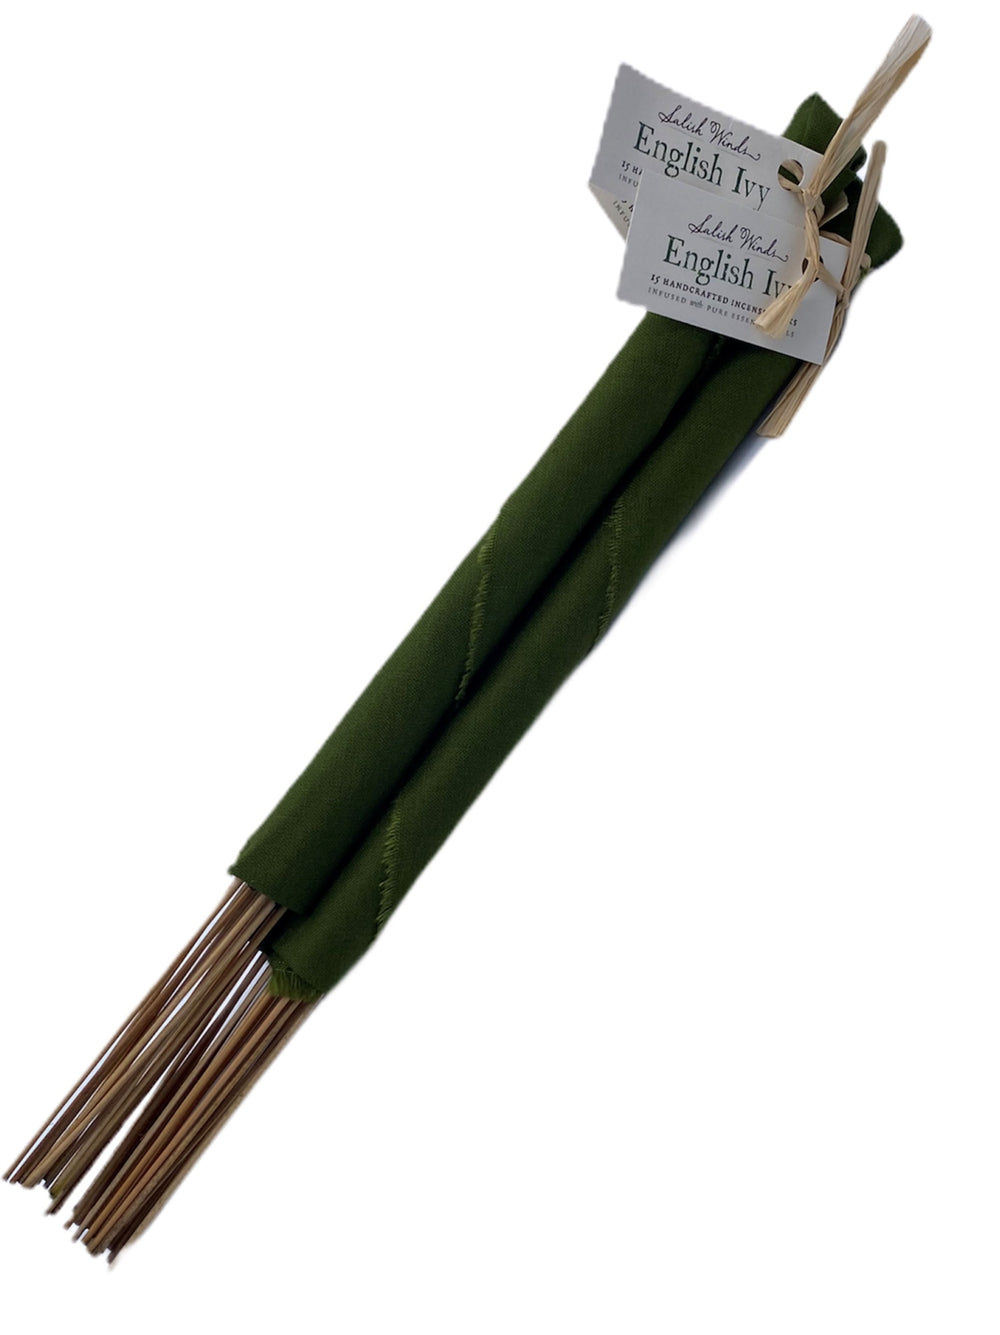 Slaish Winds Here On Earth - Now English Ivy Prince Incense Sticks